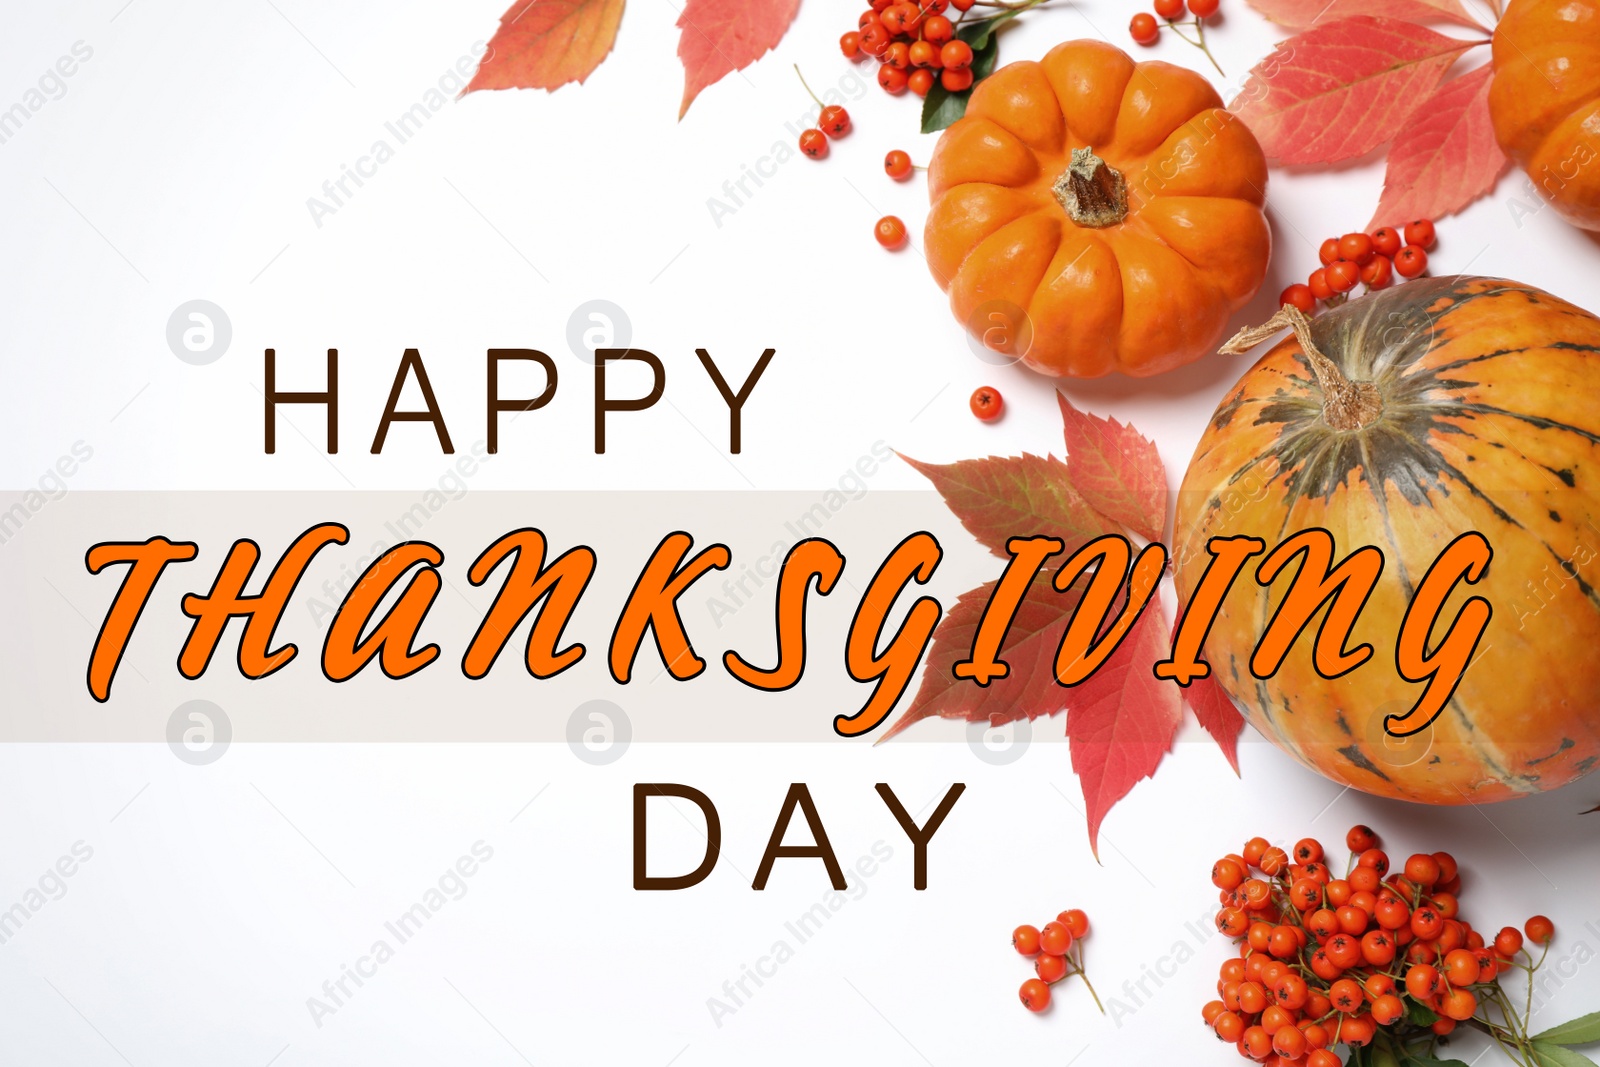 Image of Happy Thanksgiving Day card. Flat lay composition with pumpkins, berries and autumn leaves on white background